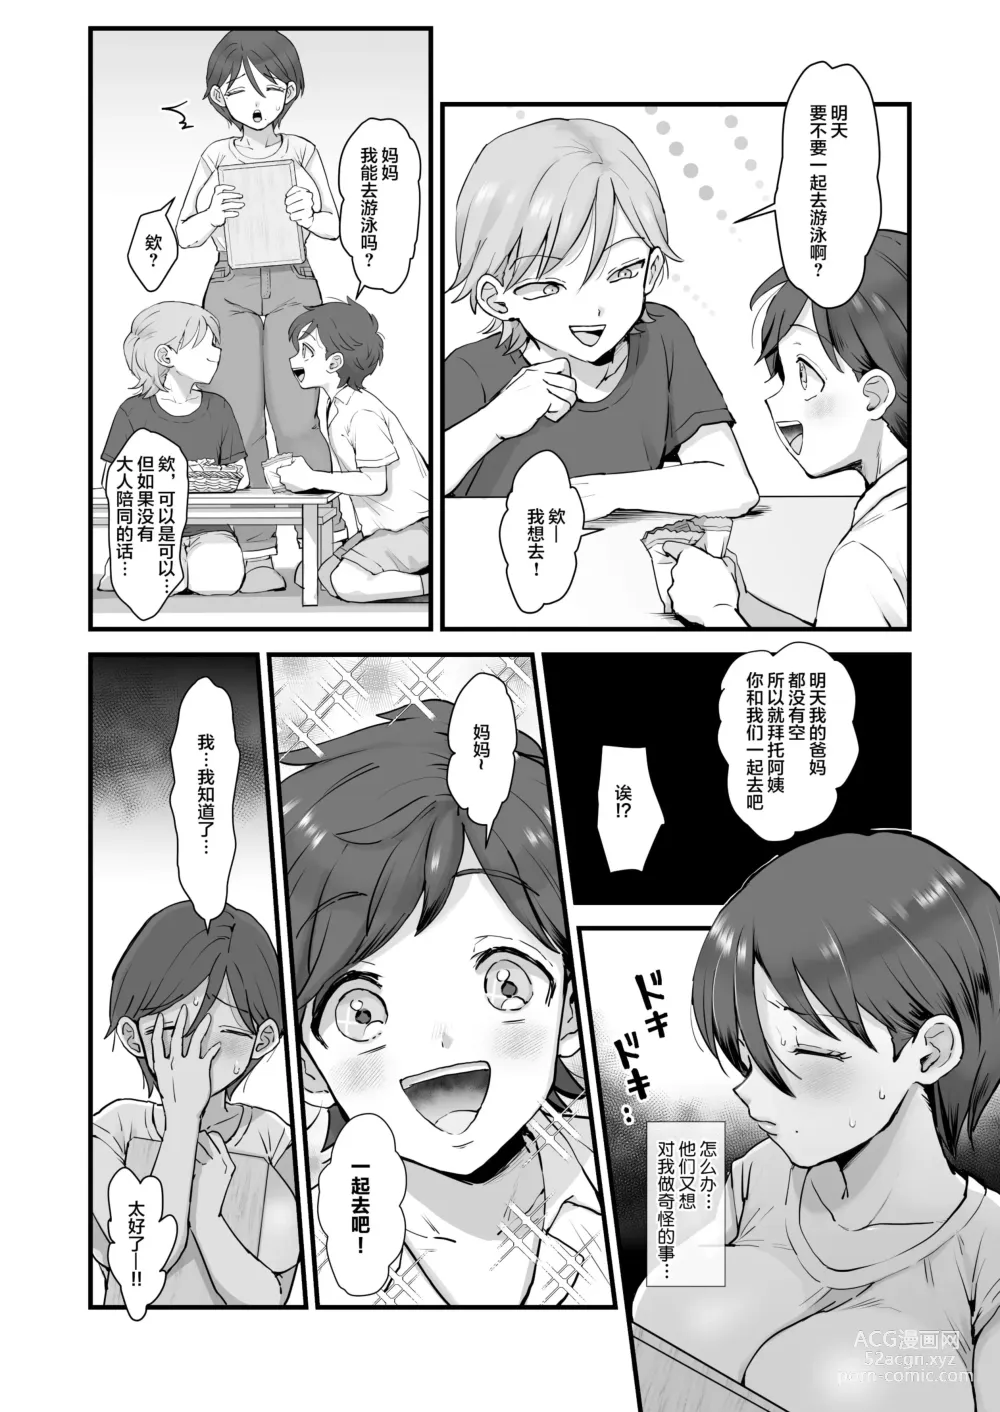 Page 7 of doujinshi sinistra (Eda)] Continued: A laid-back big-breasted mom. [Chinese translation